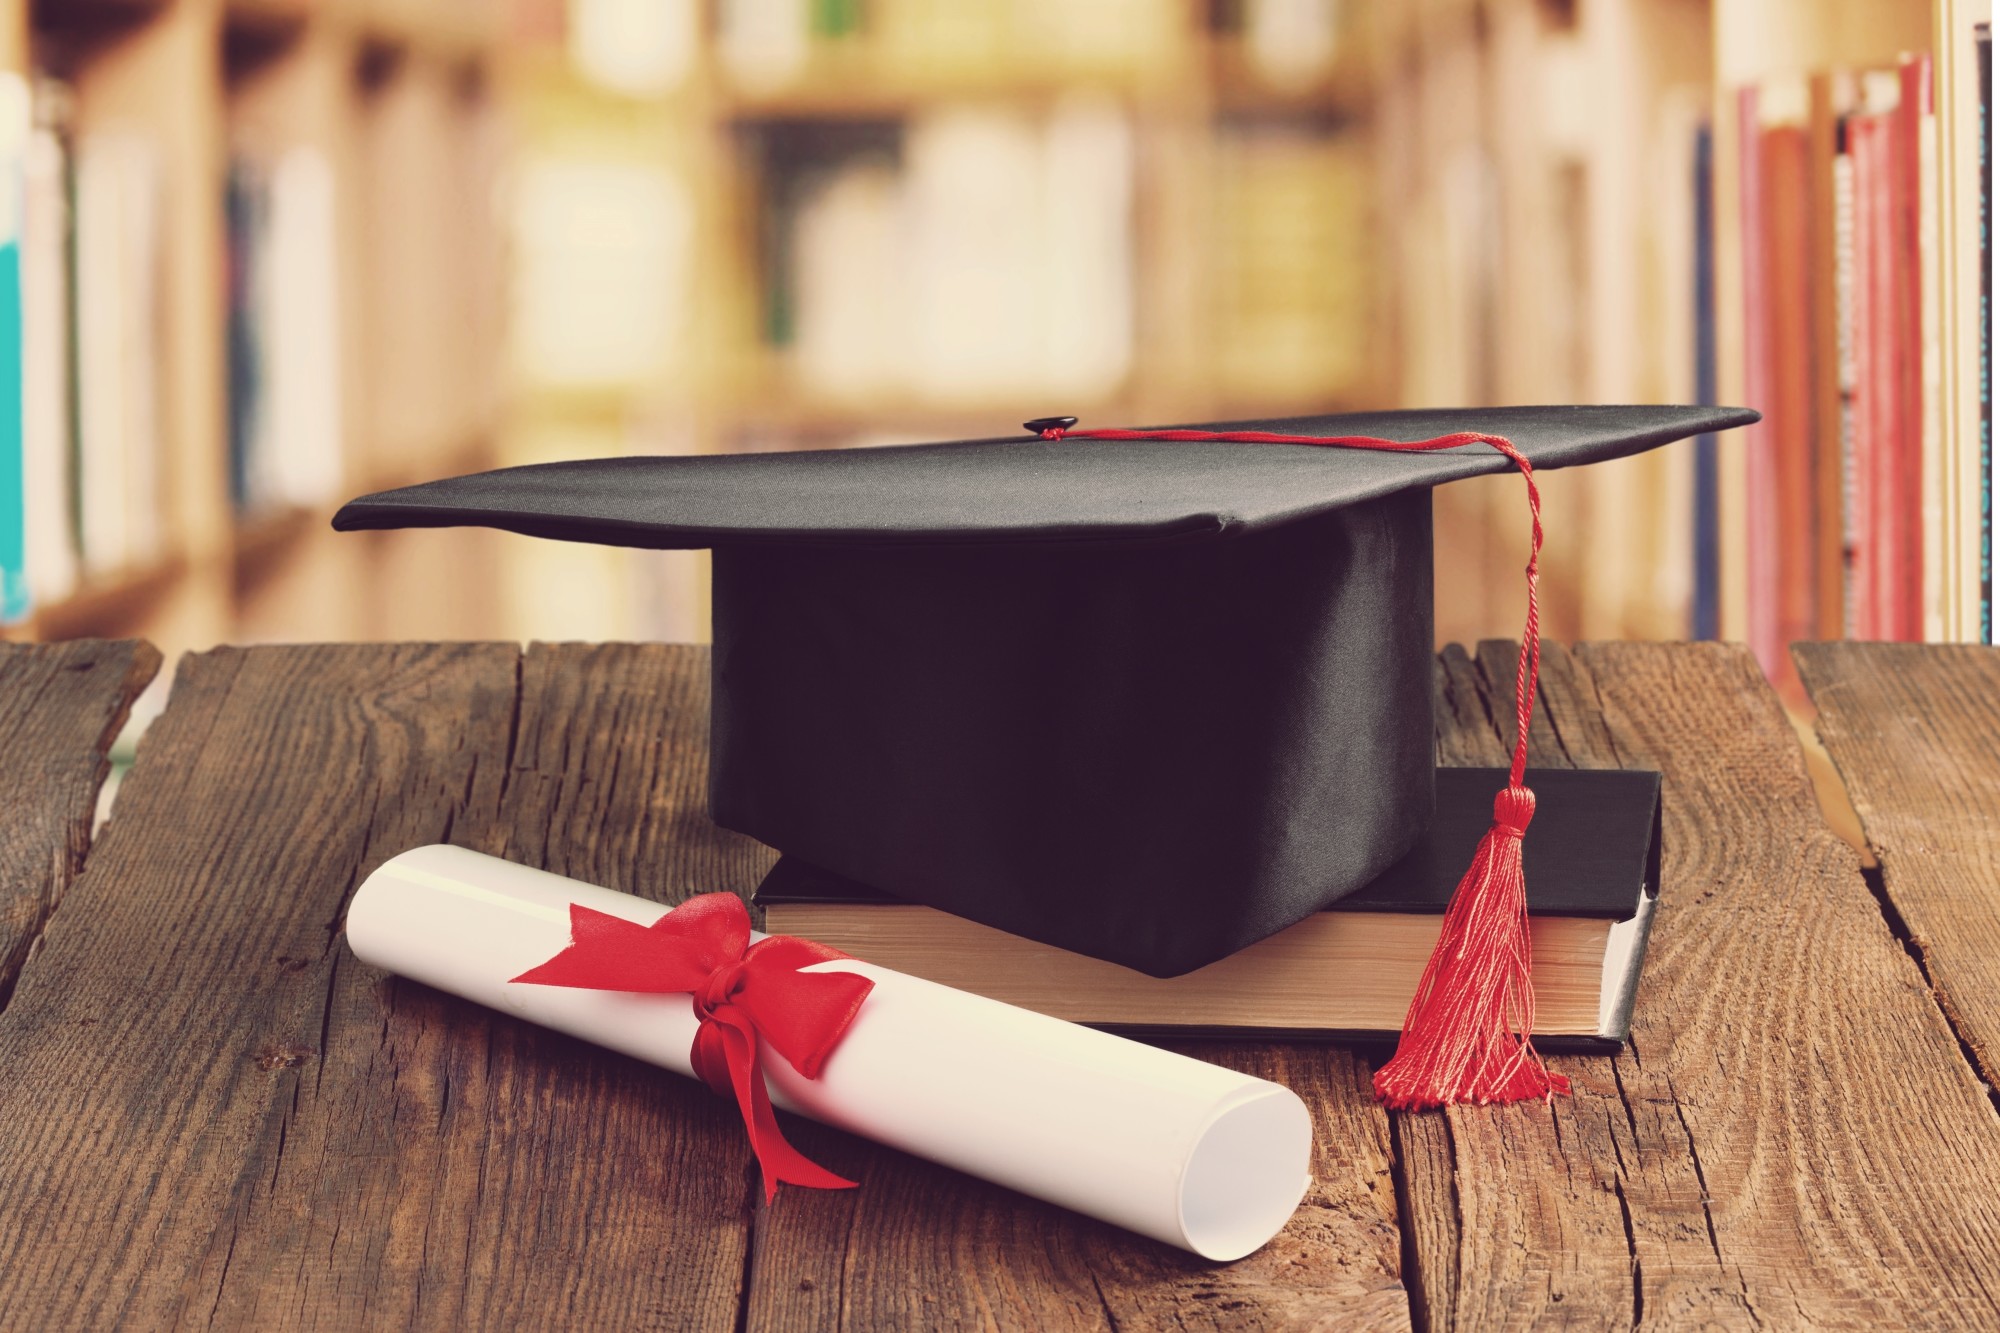 Diploma vs Degree: Know the Differences and Which One Matters